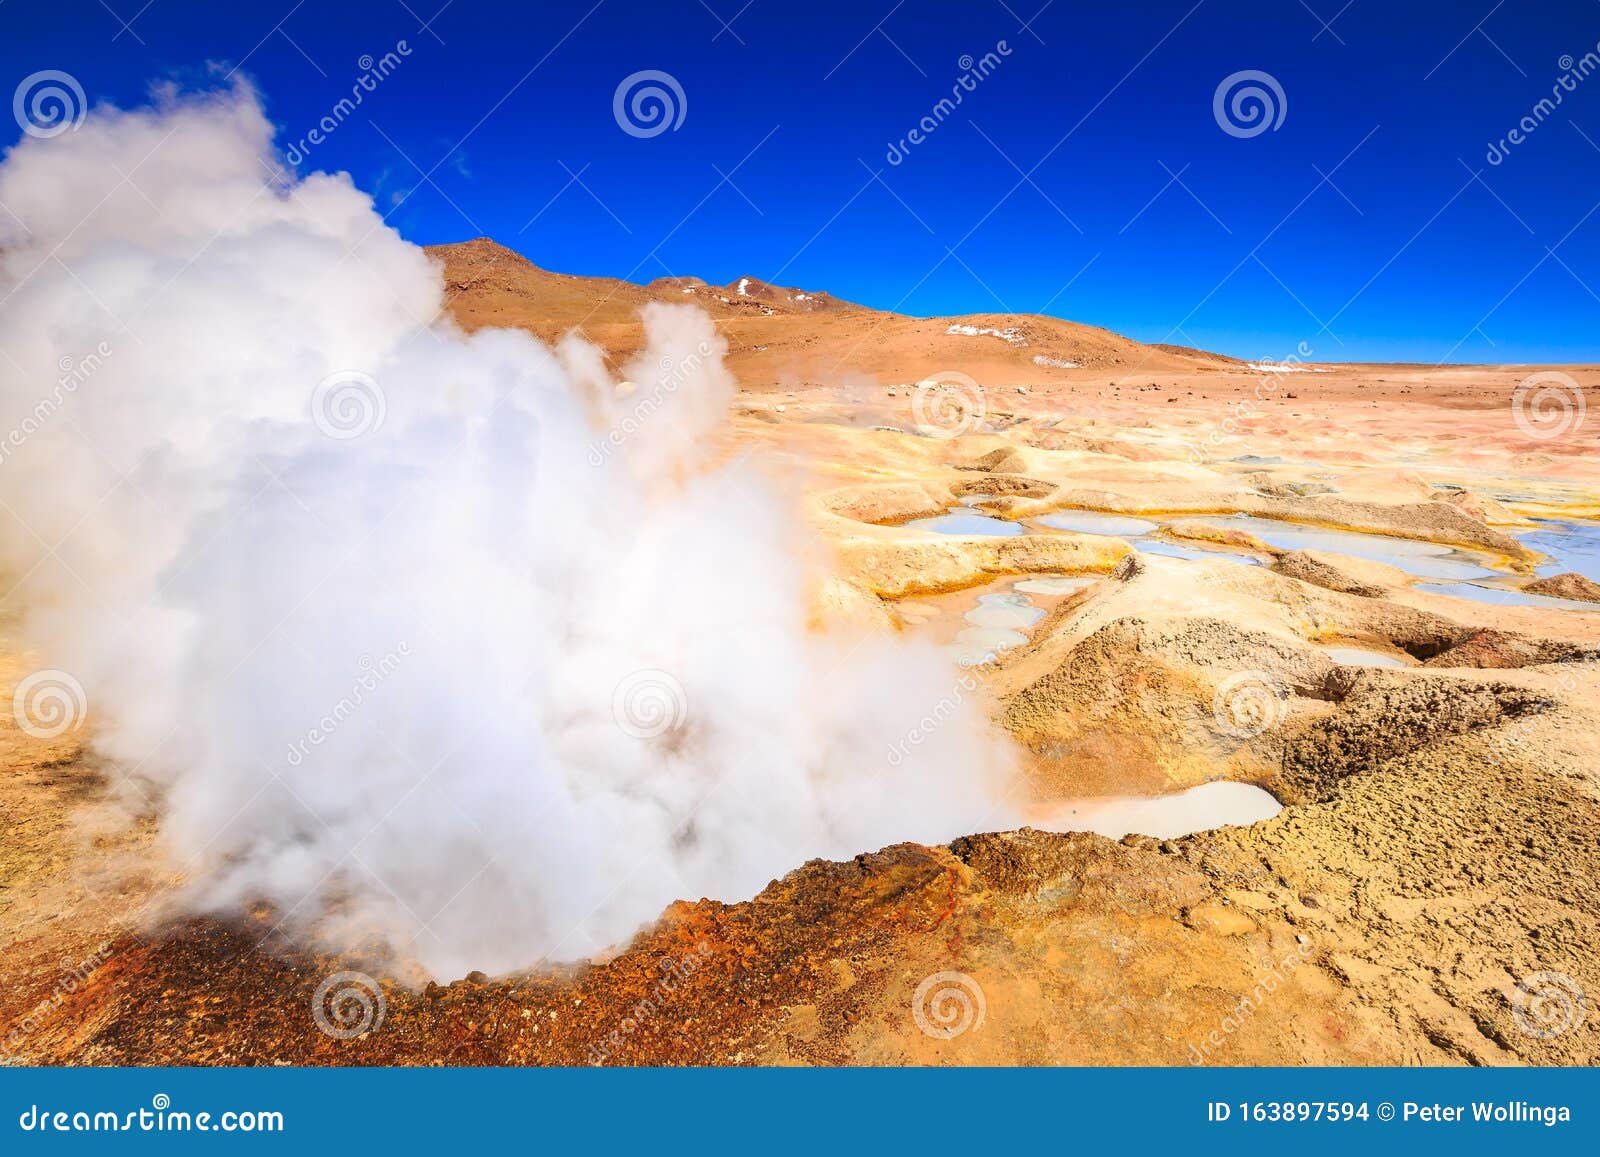 steam coming out of the `sol de la manana`  geyser in bolivia